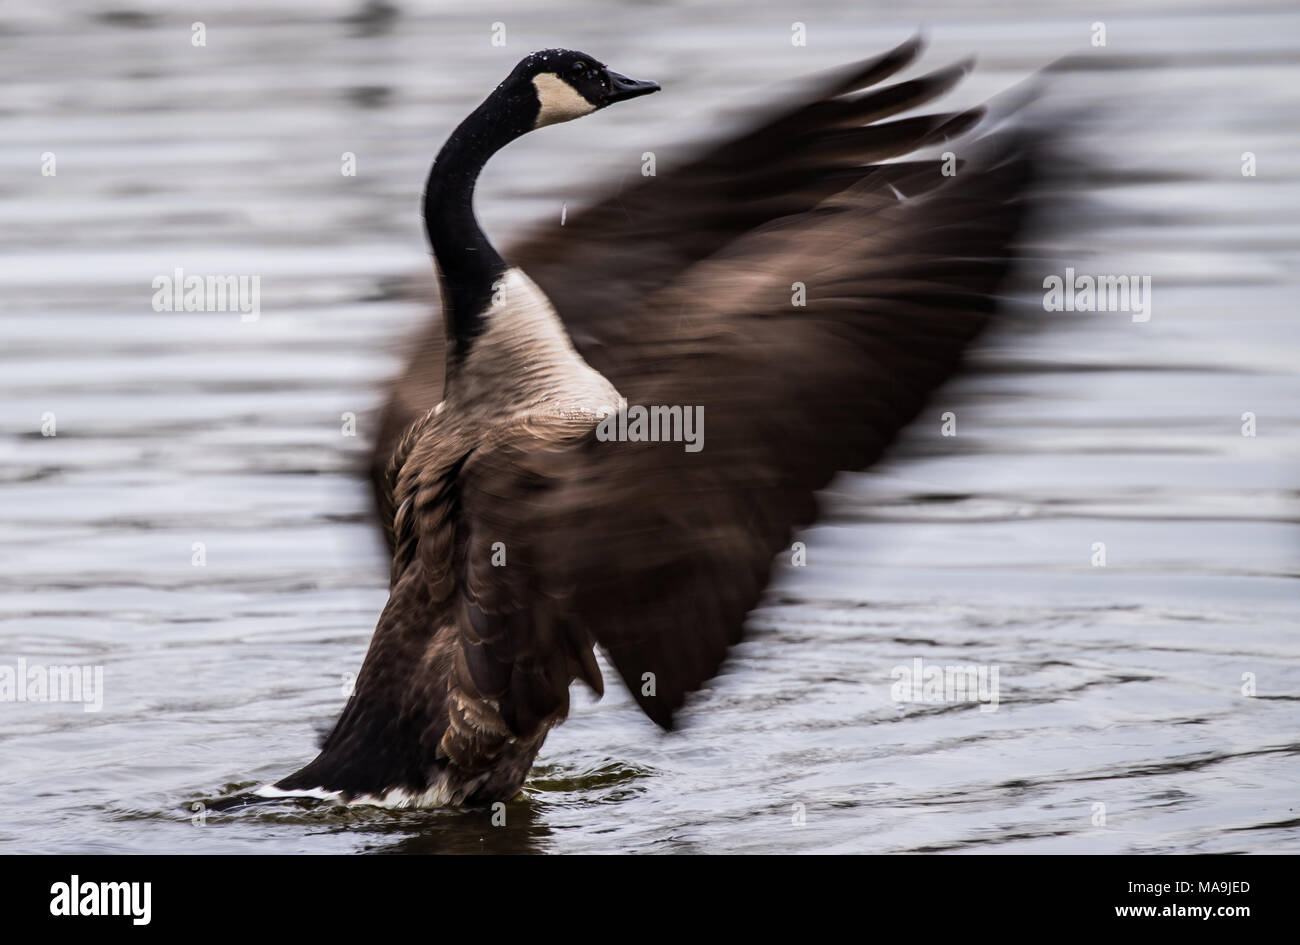 26 March 2018, Germany, Frankfurt am Main: A Canada goose spreading its  wings. The city of